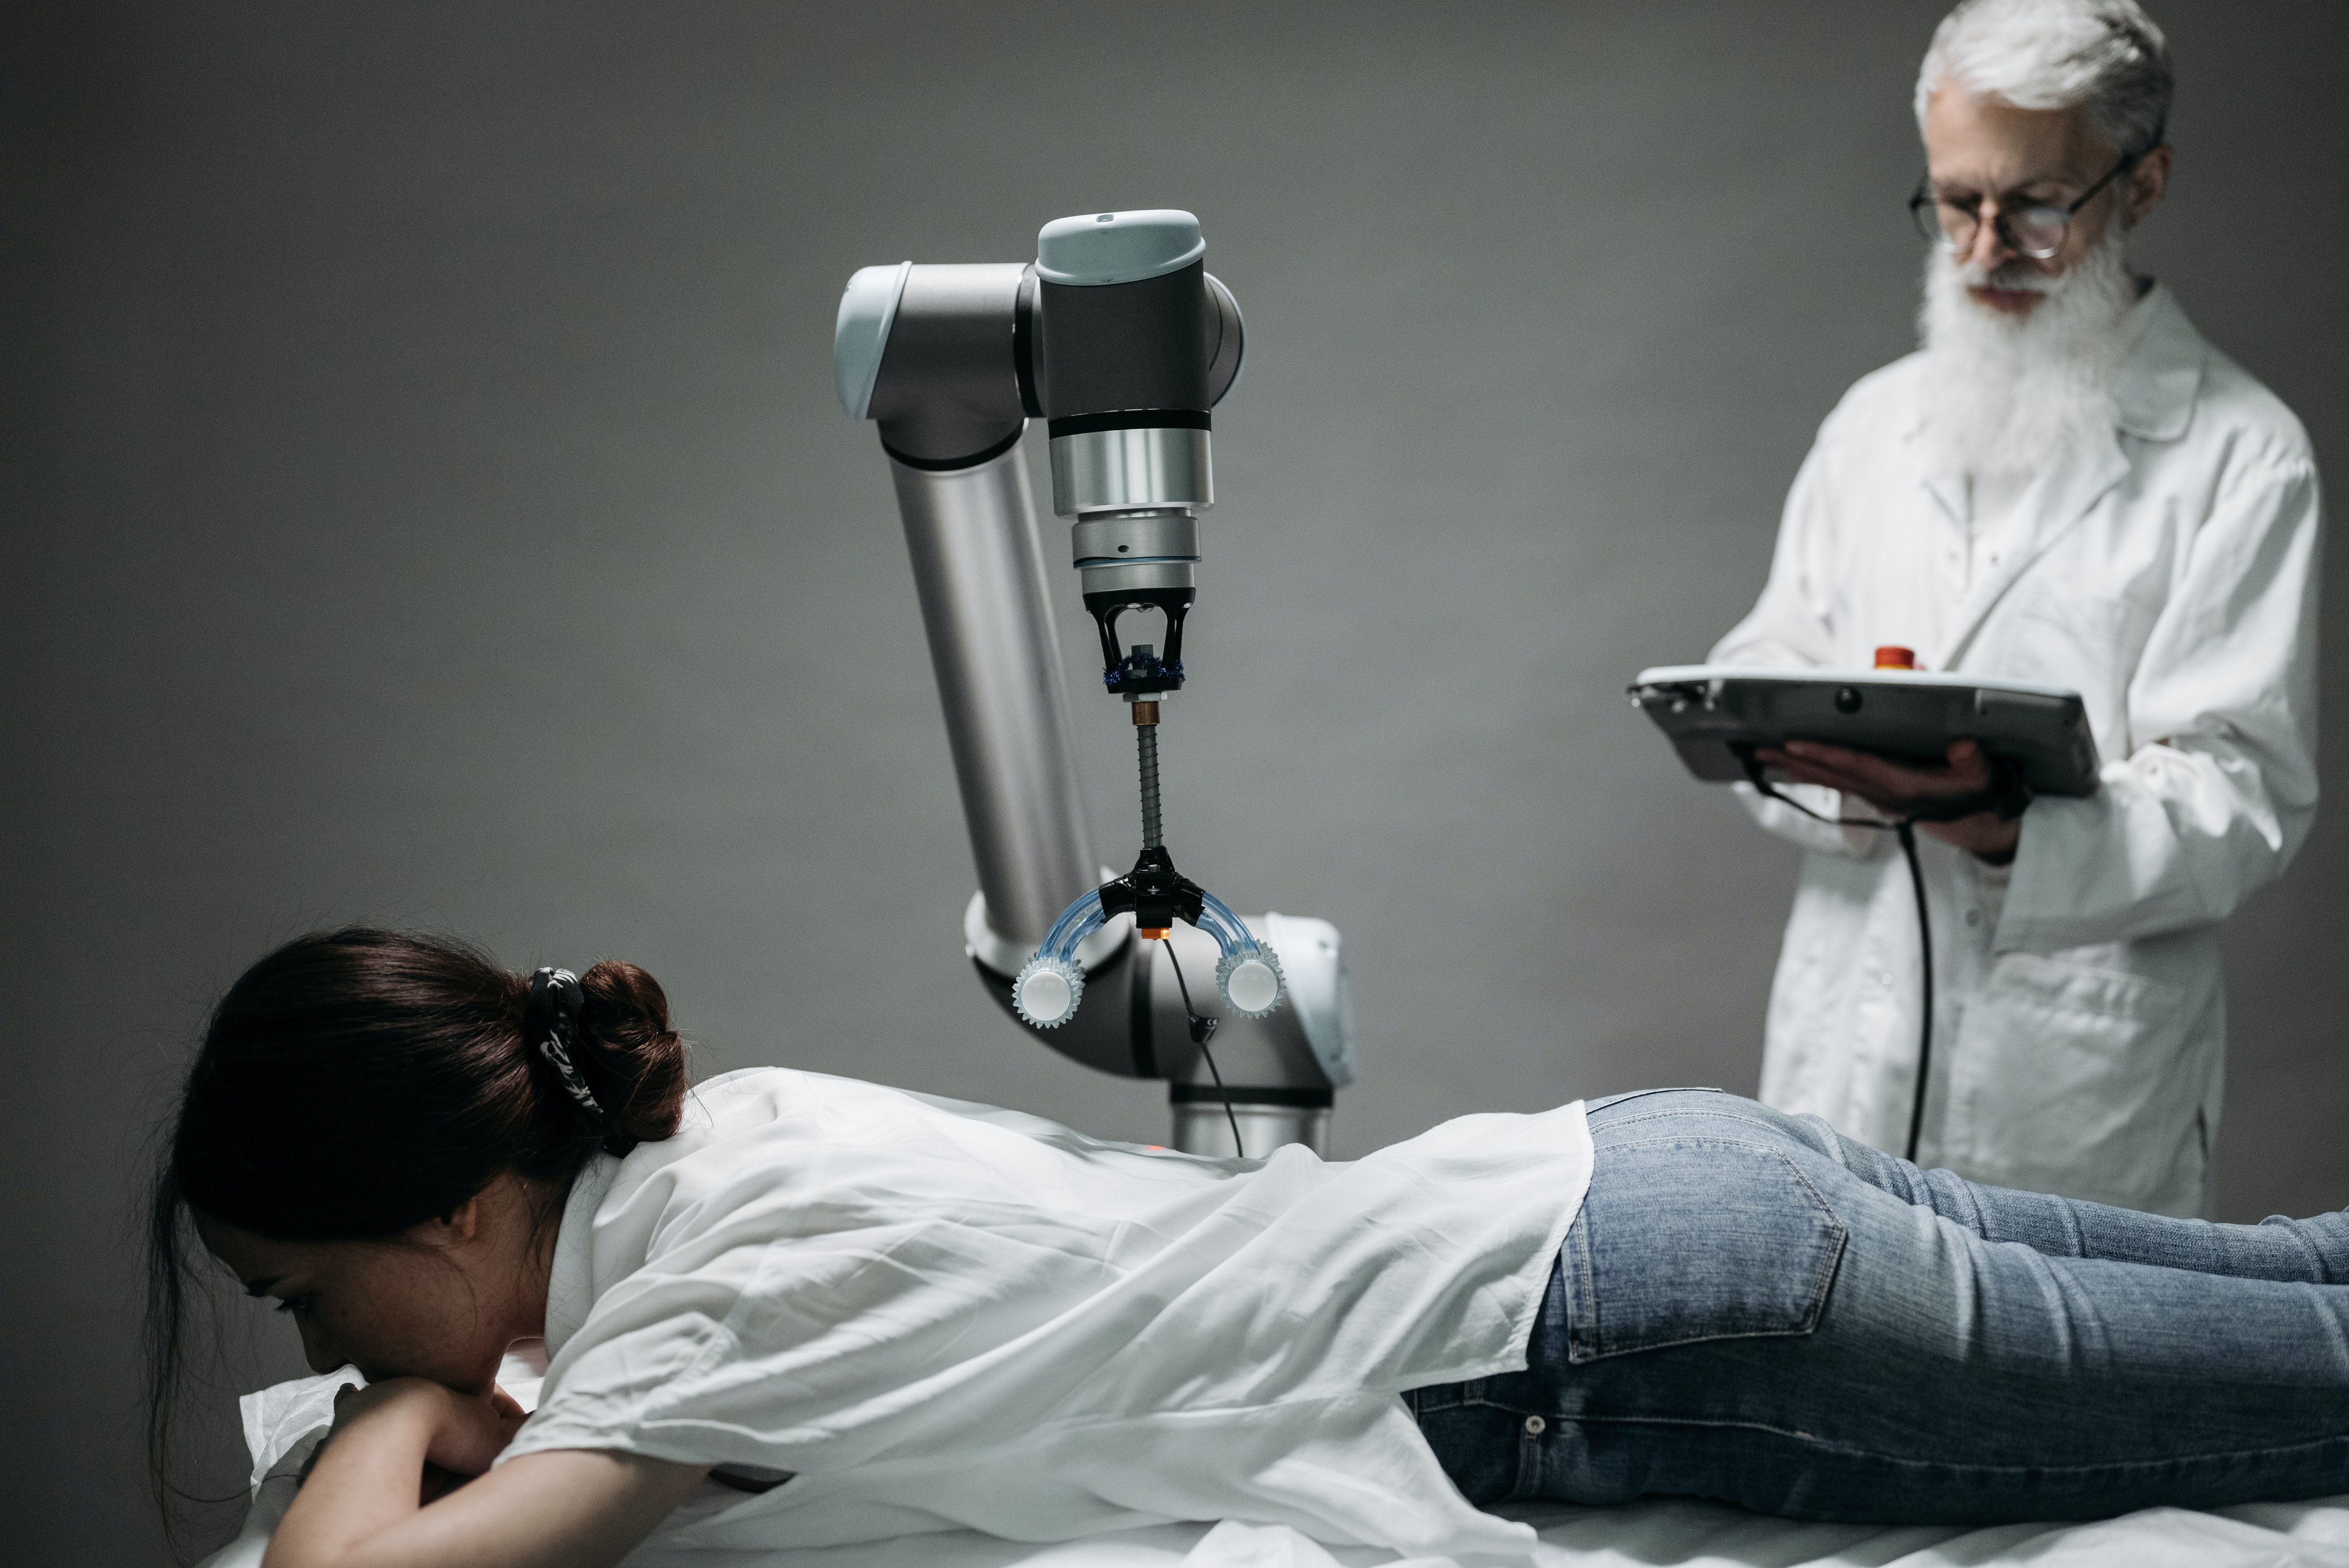 A doctor uses a robot to treat a patient